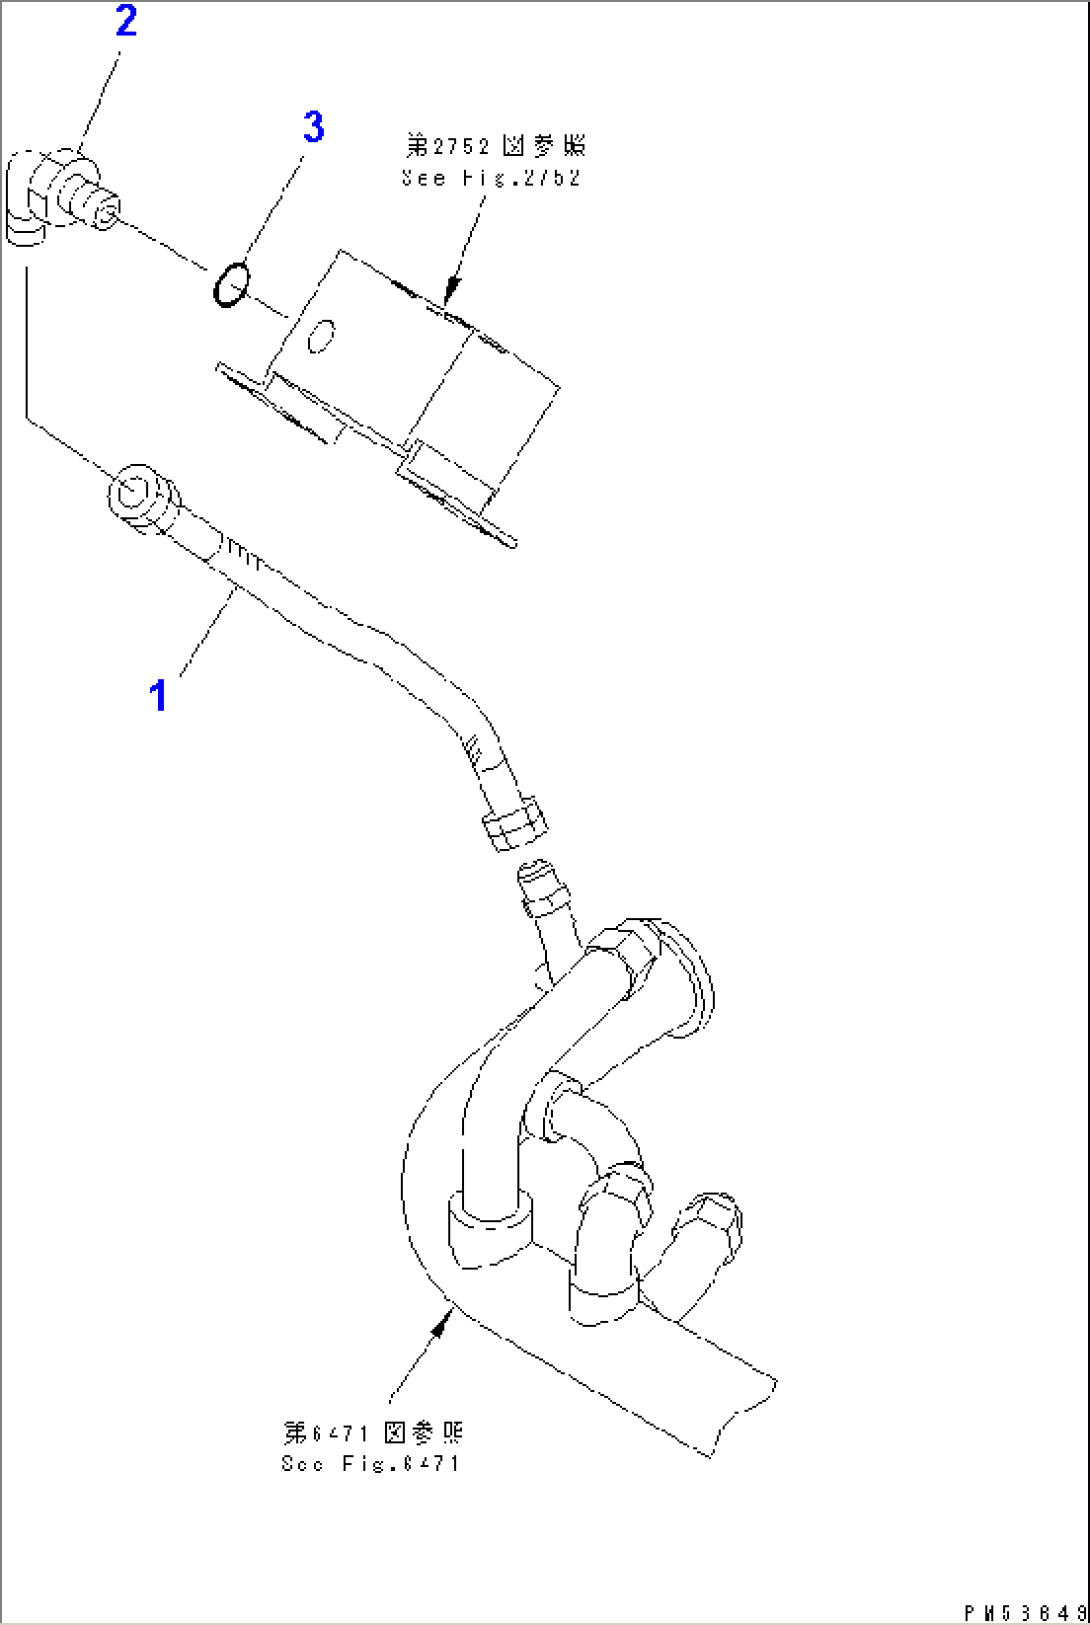 STEERING PIPING (6/8) (RELAY BLOCK TO OIL COOLER)